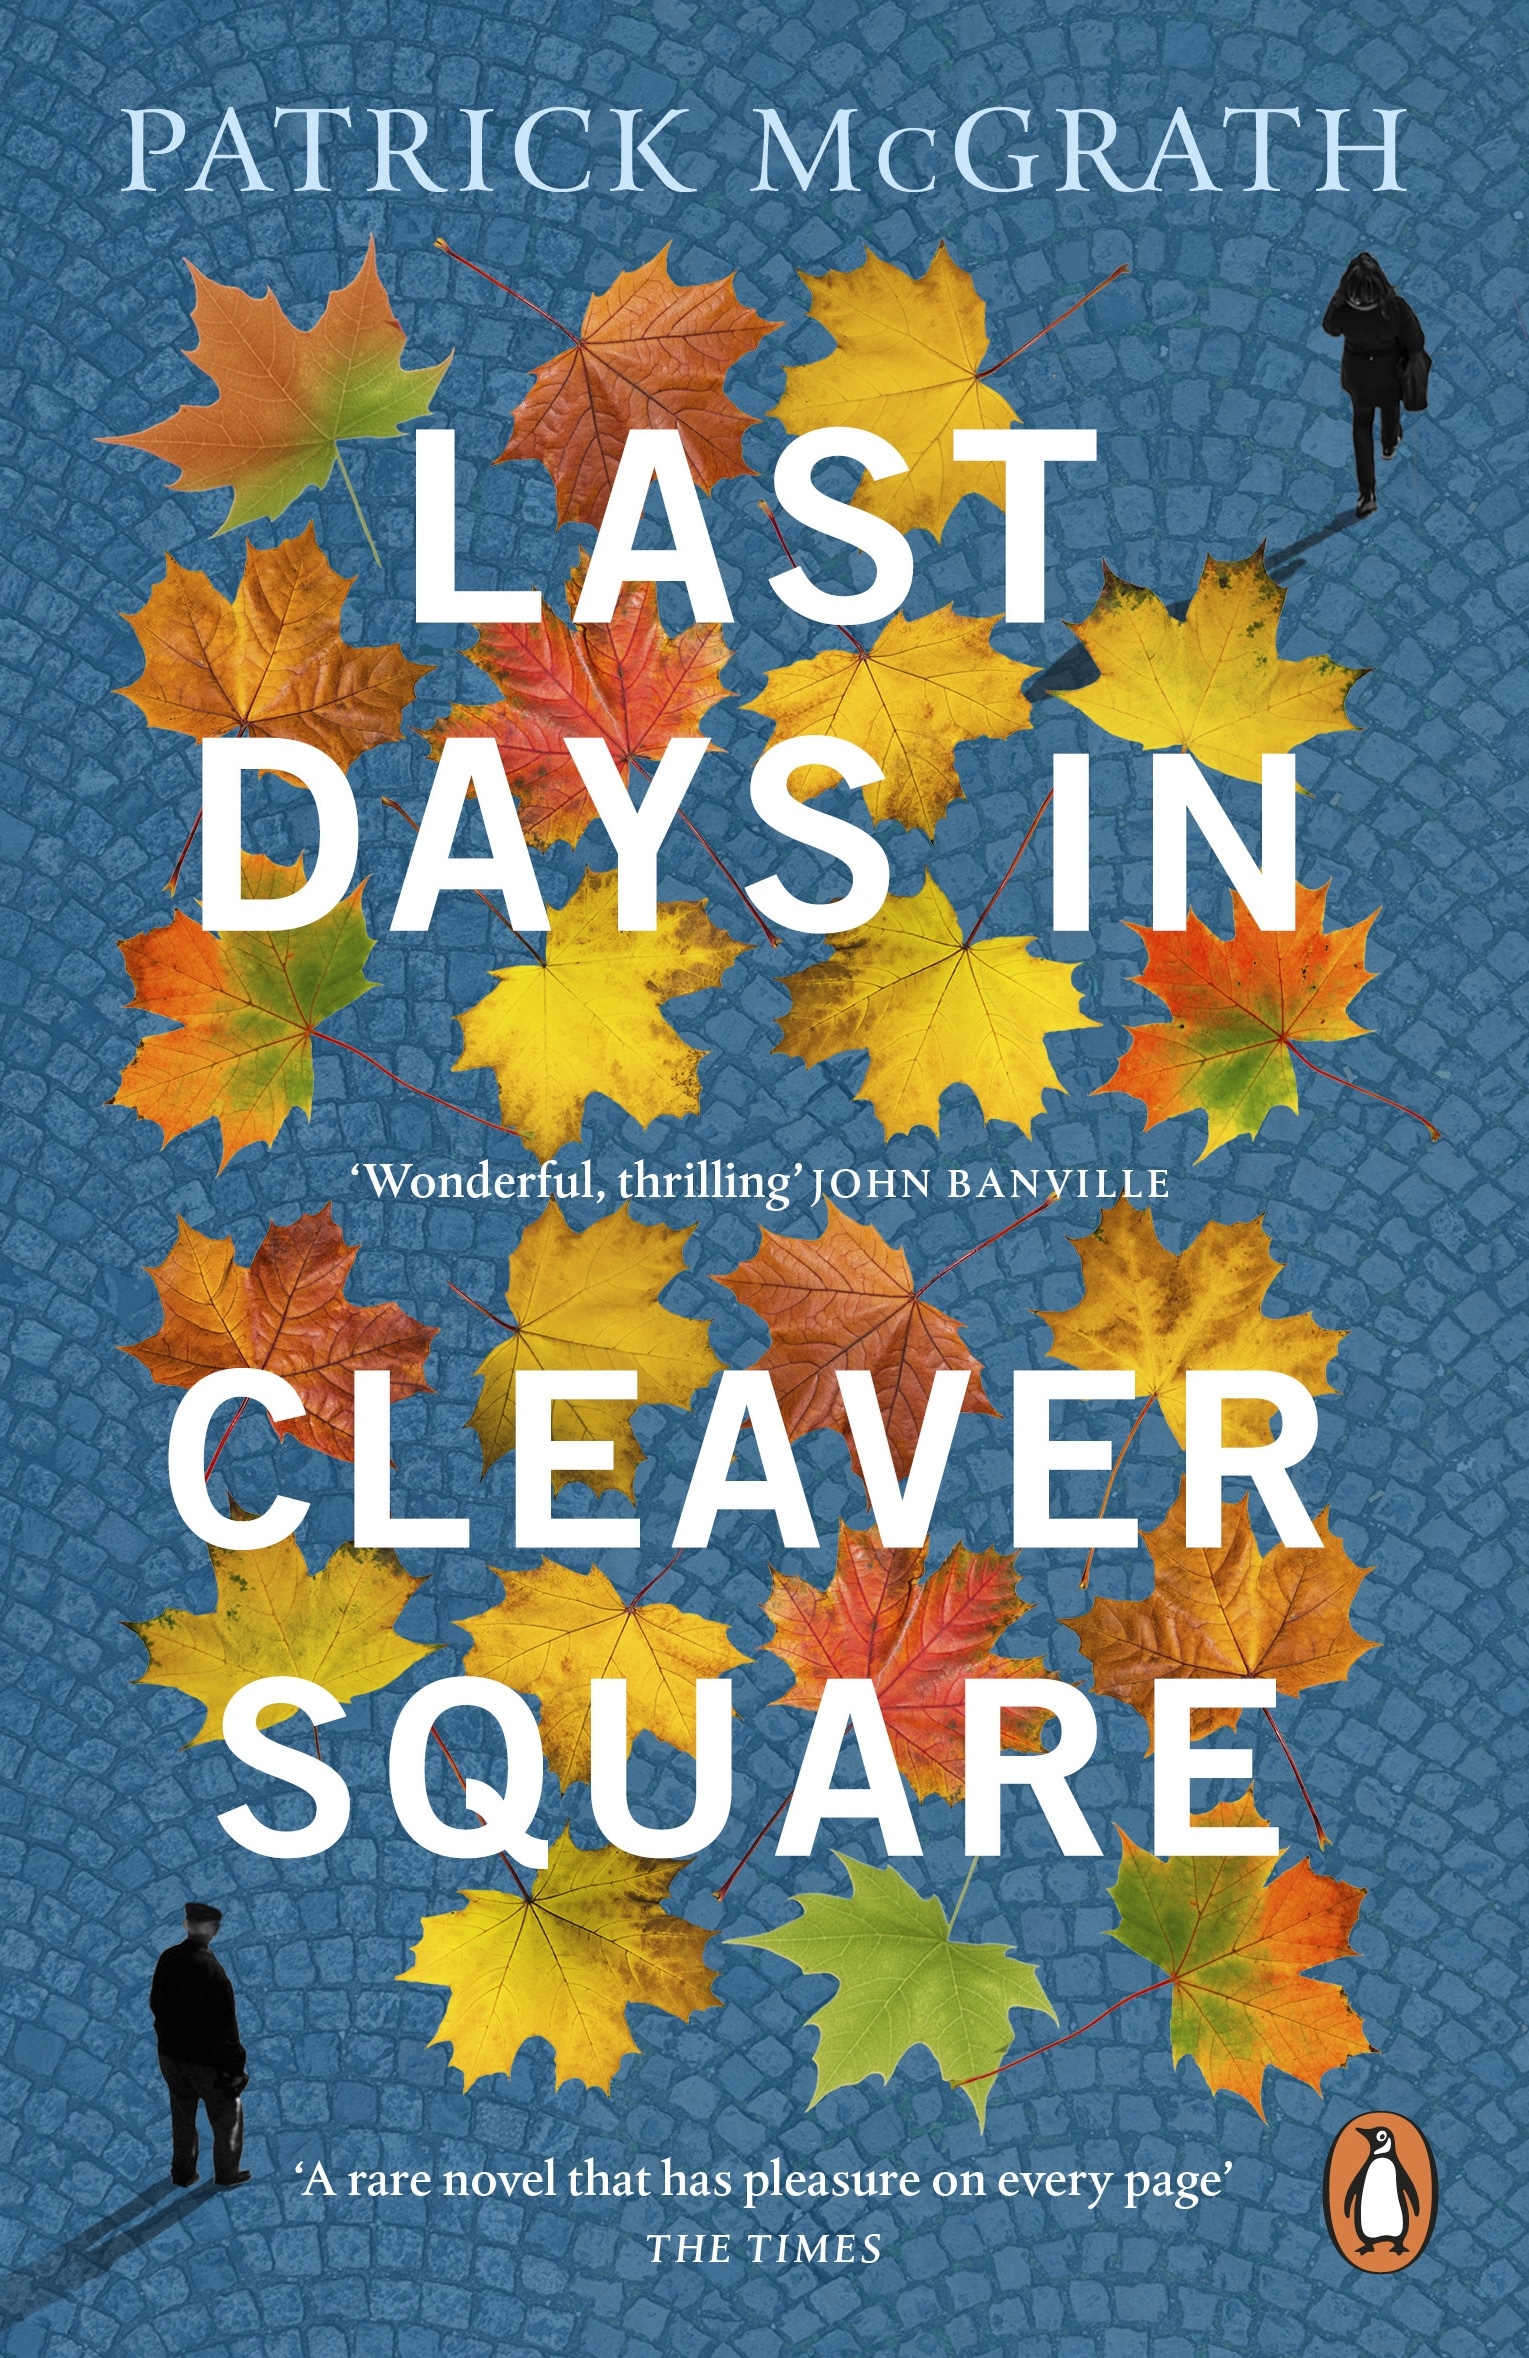 Book “Last Days in Cleaver Square” by Patrick McGrath — February 24, 2022